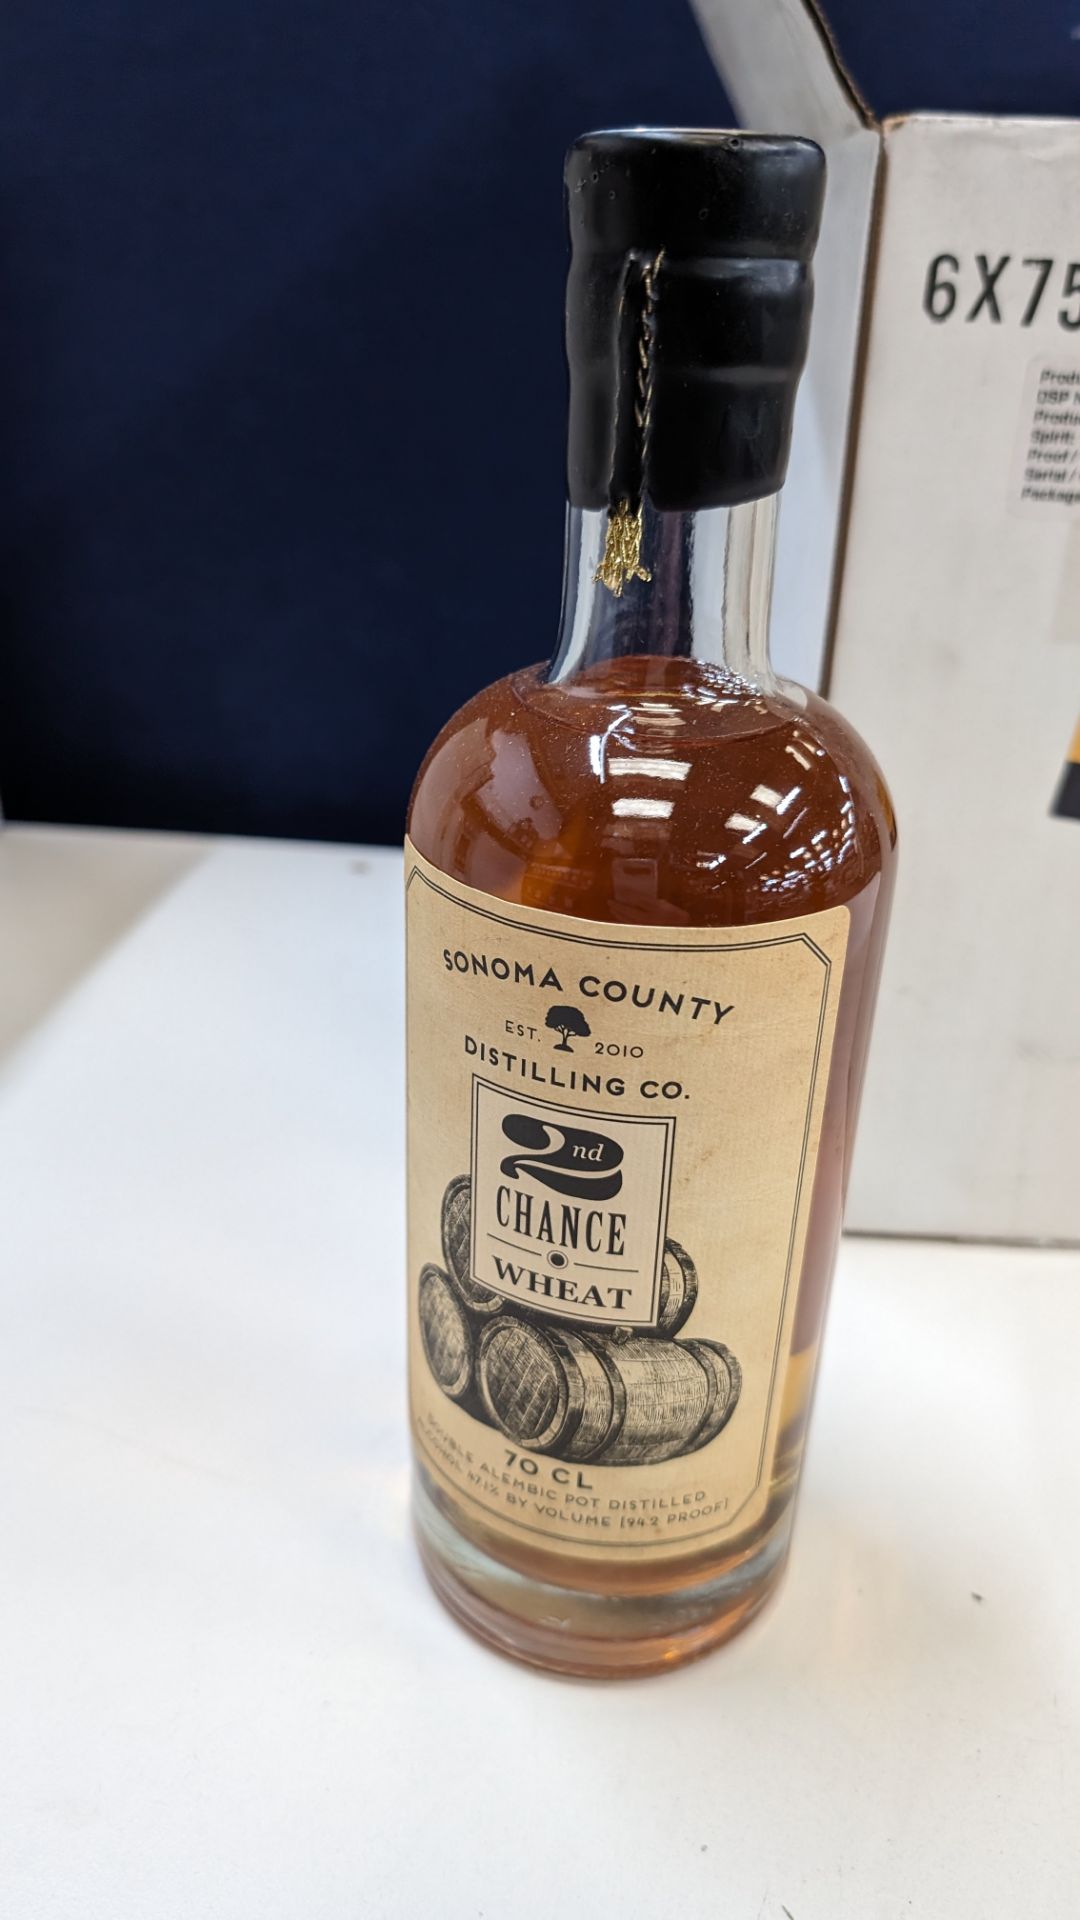 6 off 700ml bottles of Sonoma County 2nd Chance Wheat Double Alembic Pot Distilled Whiskey. In white - Image 4 of 9